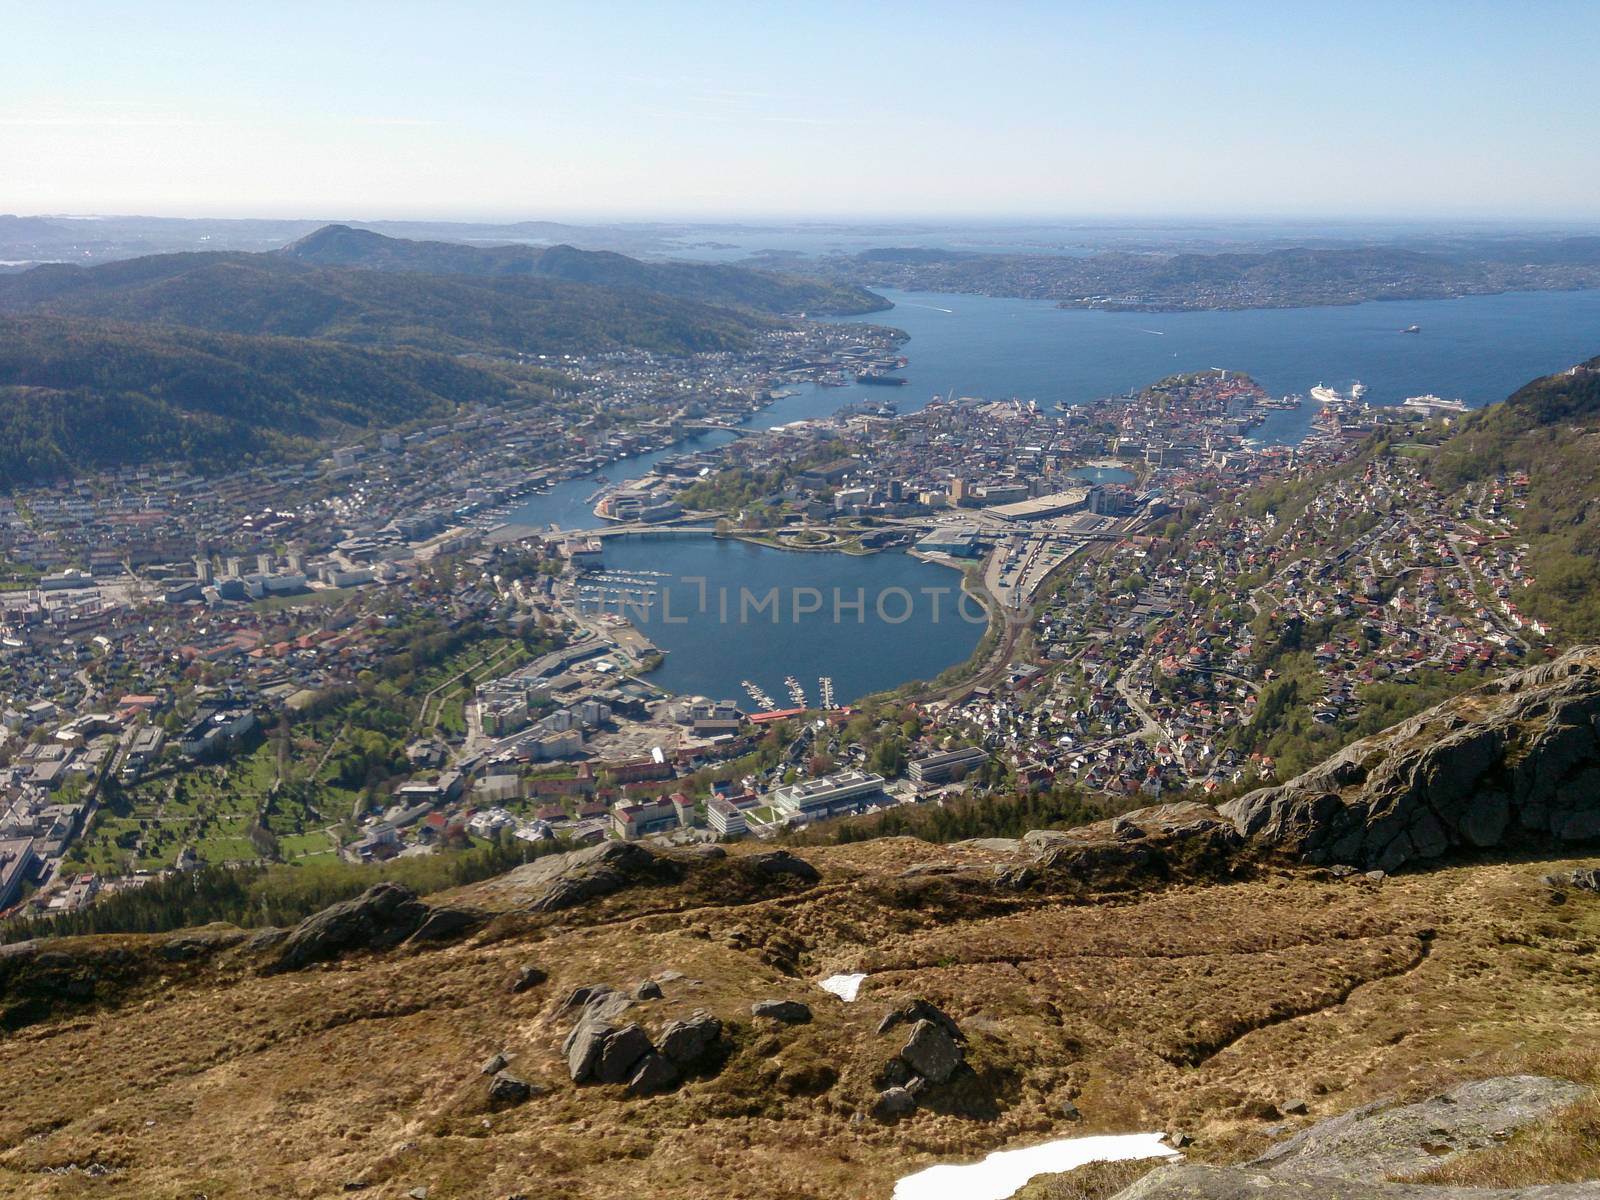 Aerial and high angle view over the city of Bergen, Norway, with districts and surrounding water. Cityscape and skyline.